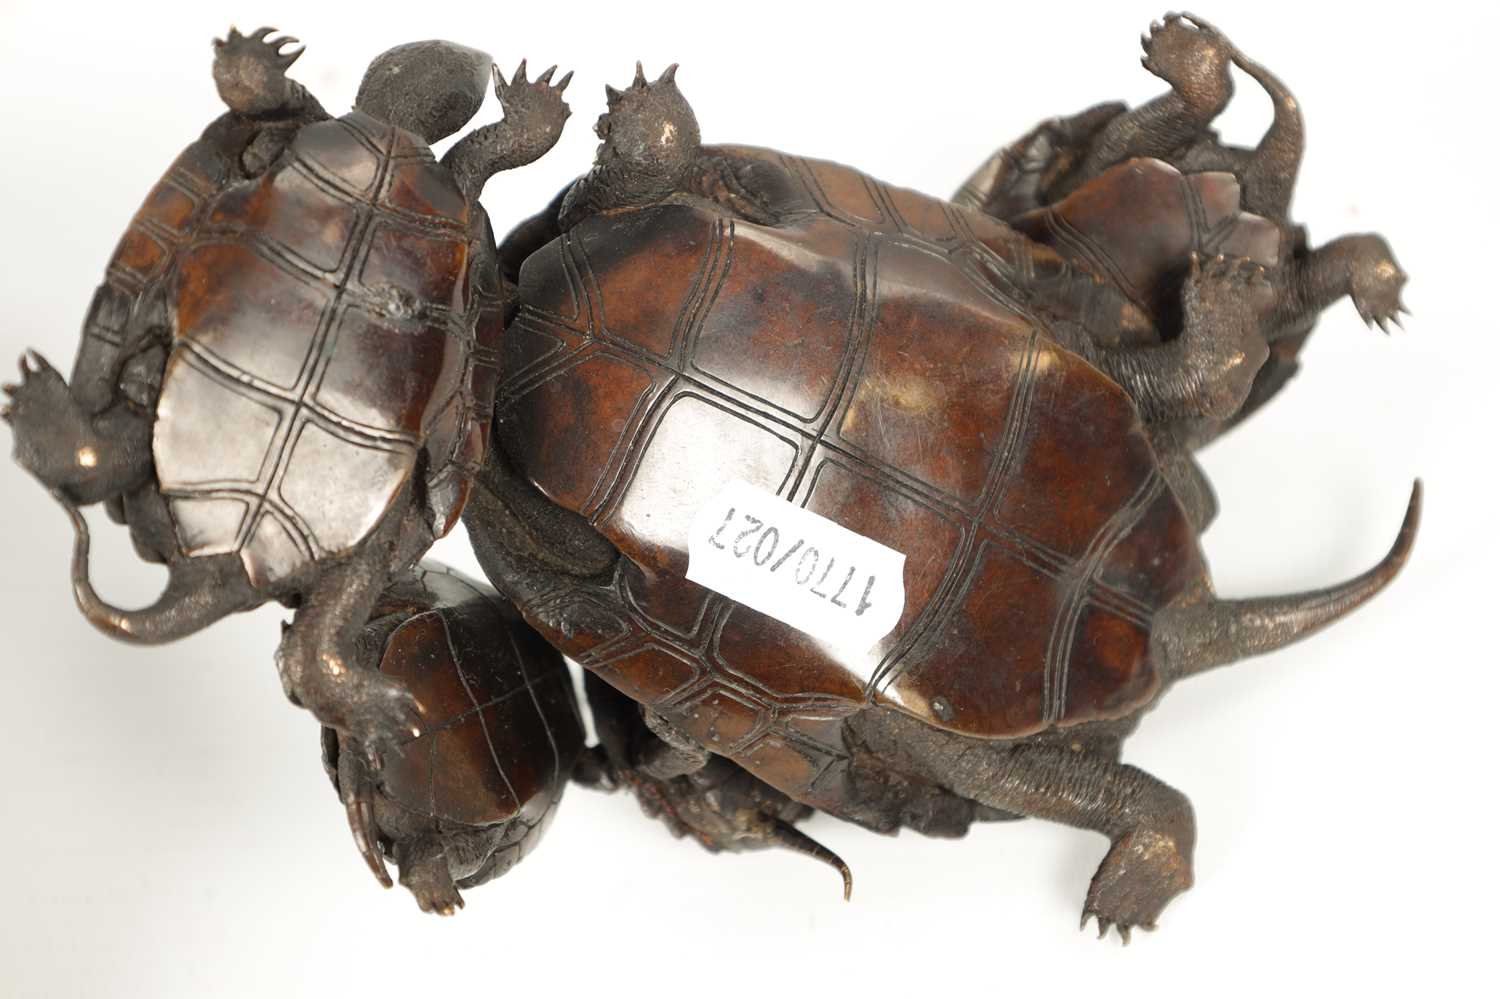 A FINE JAPANESE MEIJI PERIOD BRONZE SCULPTURE OF A GROUP OF TURTLES - Image 8 of 8